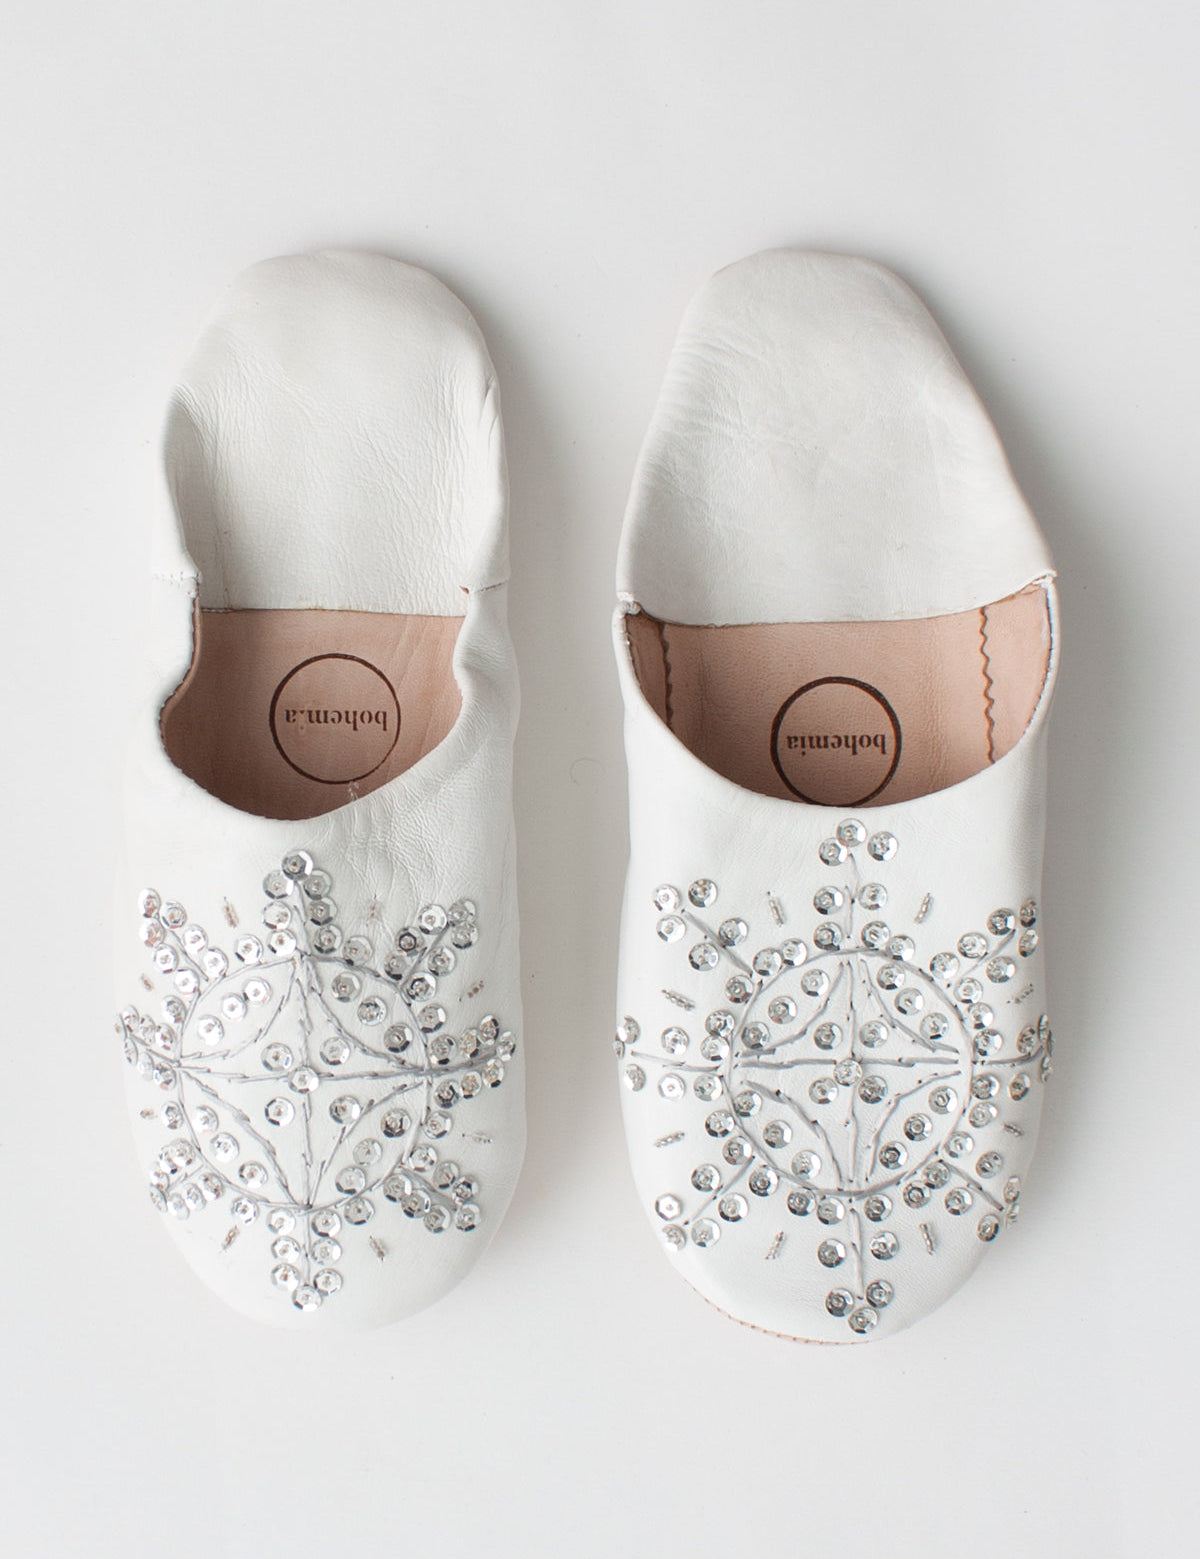 Bohemia-Babouche-Sequin-Slippers-White-and-Silver_81a8026c-02d5-4c17-bdbc-554f4821fde1.jpg